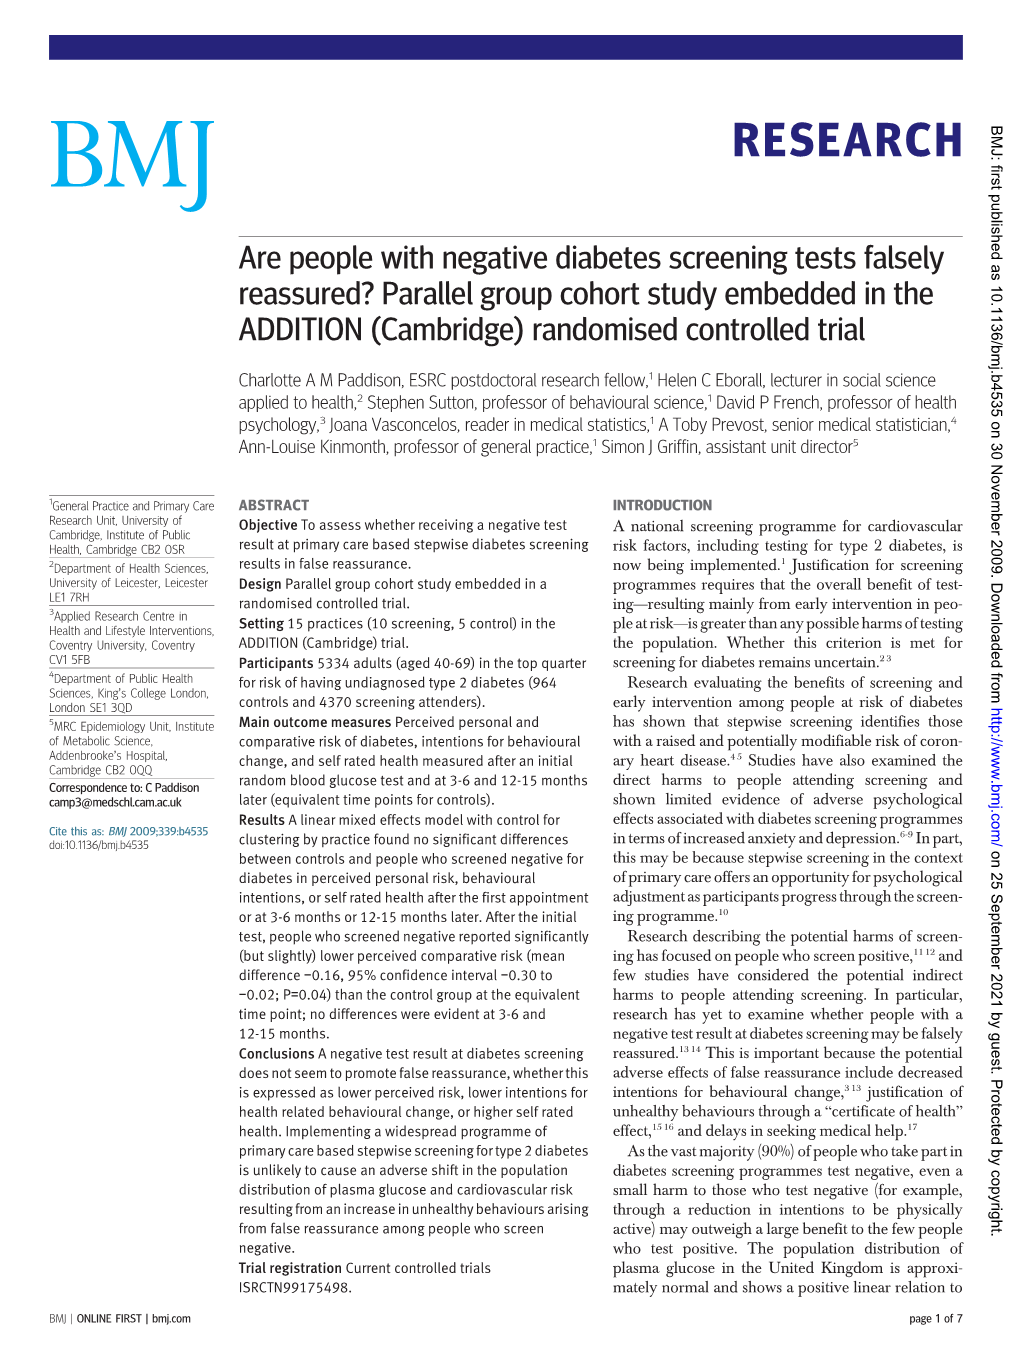 Are People with Negative Diabetes Screening Tests Falsely Reassured? Parallel Group Cohort Study Embedded in the ADDITION (Cambridge) Randomised Controlled Trial